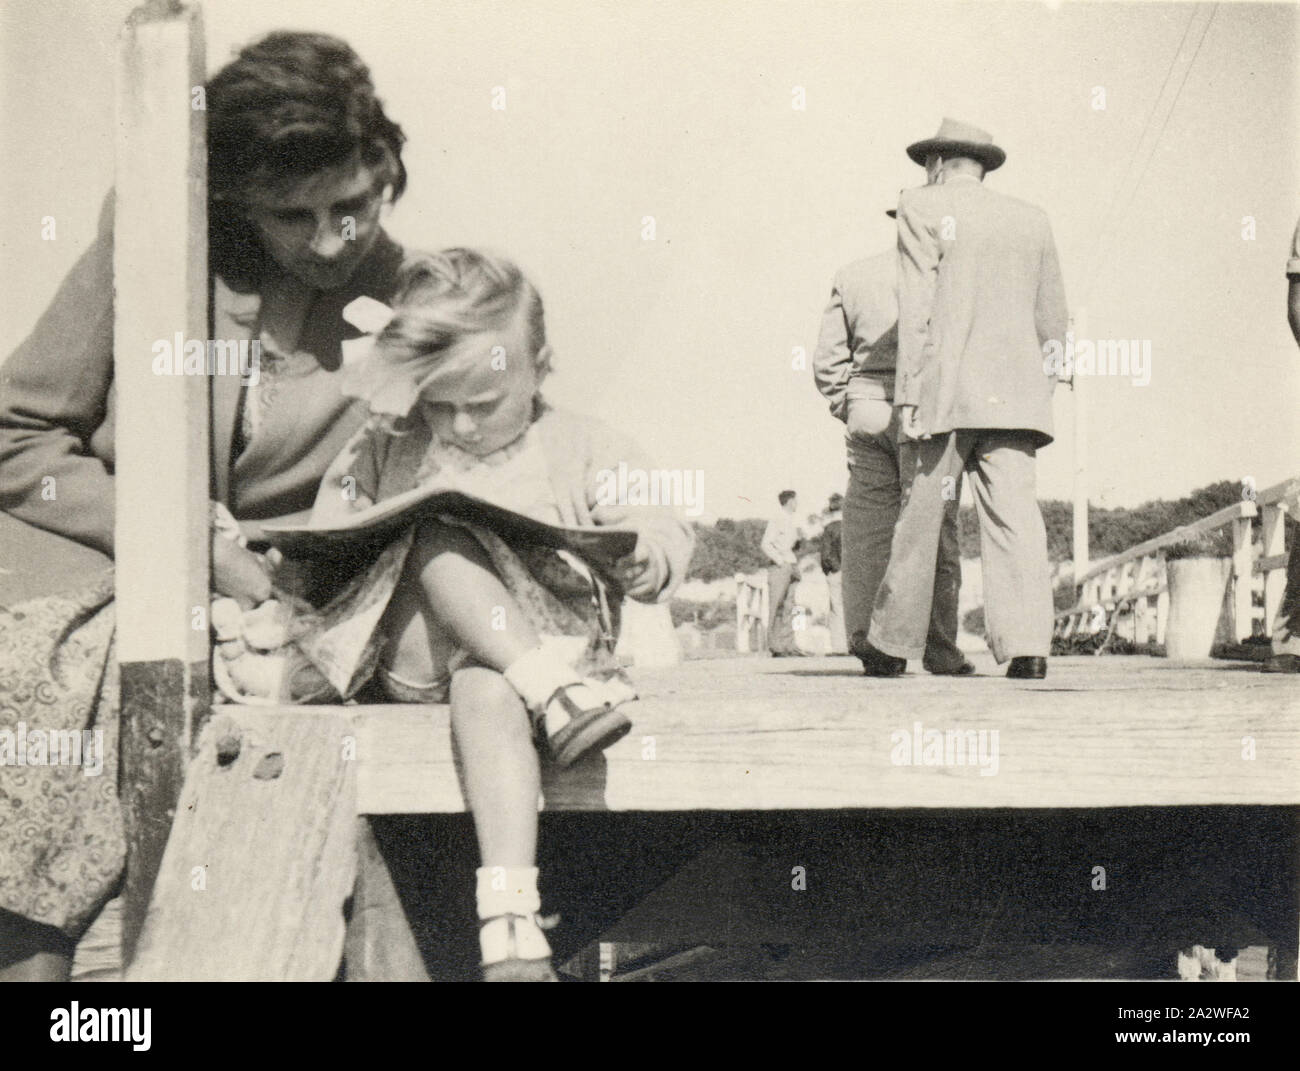 Photograph - Eileen & Susan Leech Sitting Reading on Frankston Pier, Frankston, circa 1954, Photograph of Eileen Leech and her daughter Susan sitting on the end of Frankston Pier, reading a book, Frankston, Melbourne, circa 1954. Susan had migrated with her parents Eileen and James Leech to Melbourne from England in 1953 and they returned to England in 1956. James and Eileen Leech and their two and a half year old daughter Susan migrated from Manchester, England in November 1953 under Stock Photo